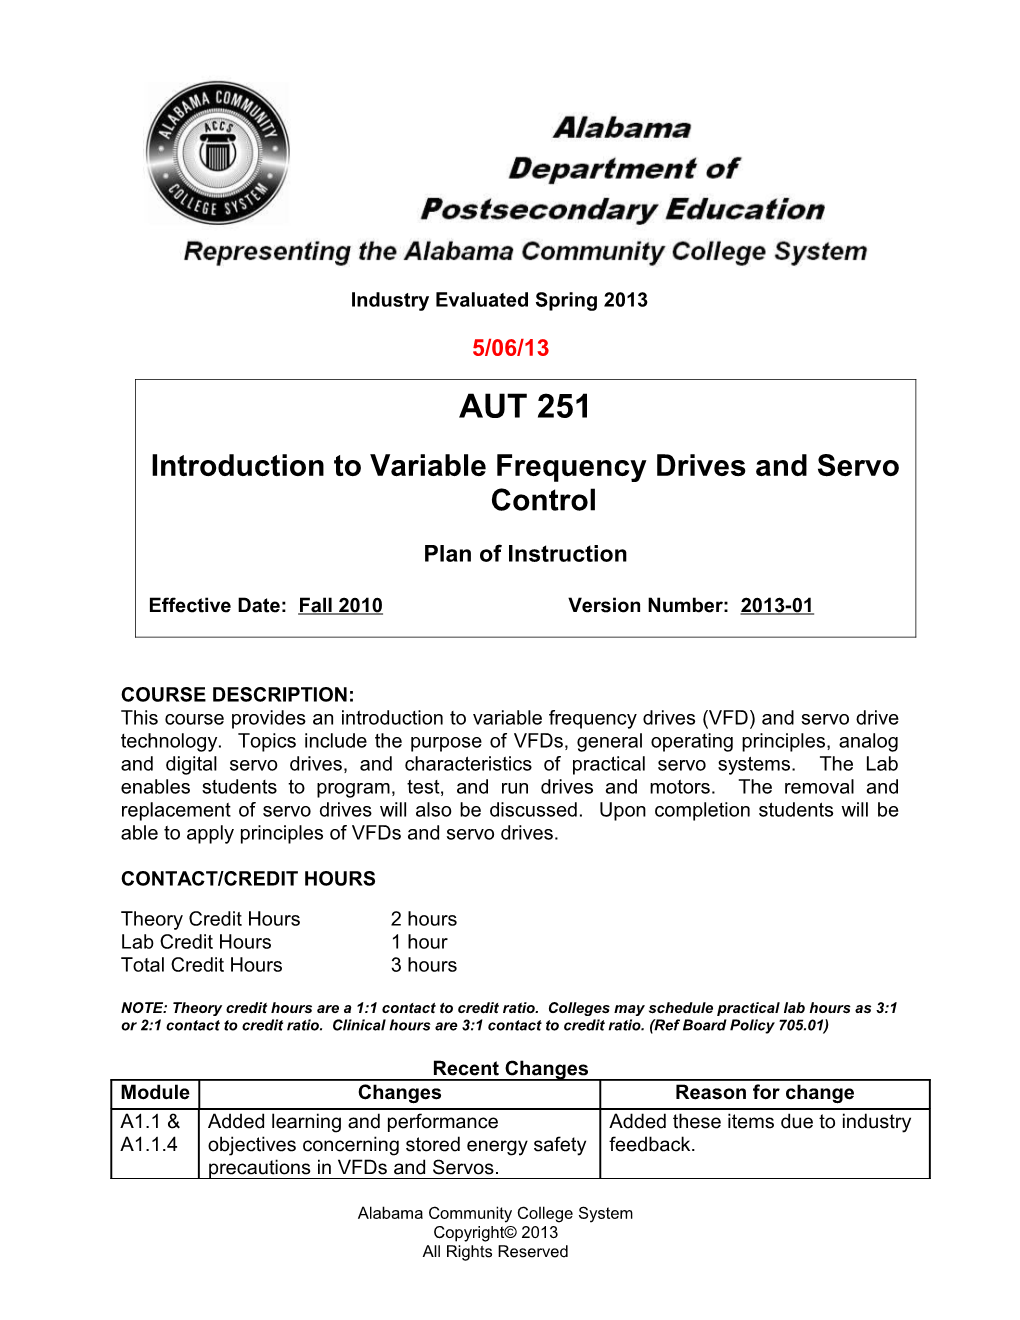 AUT 251 Introduction to Variable Frequency Drives and Servo Control